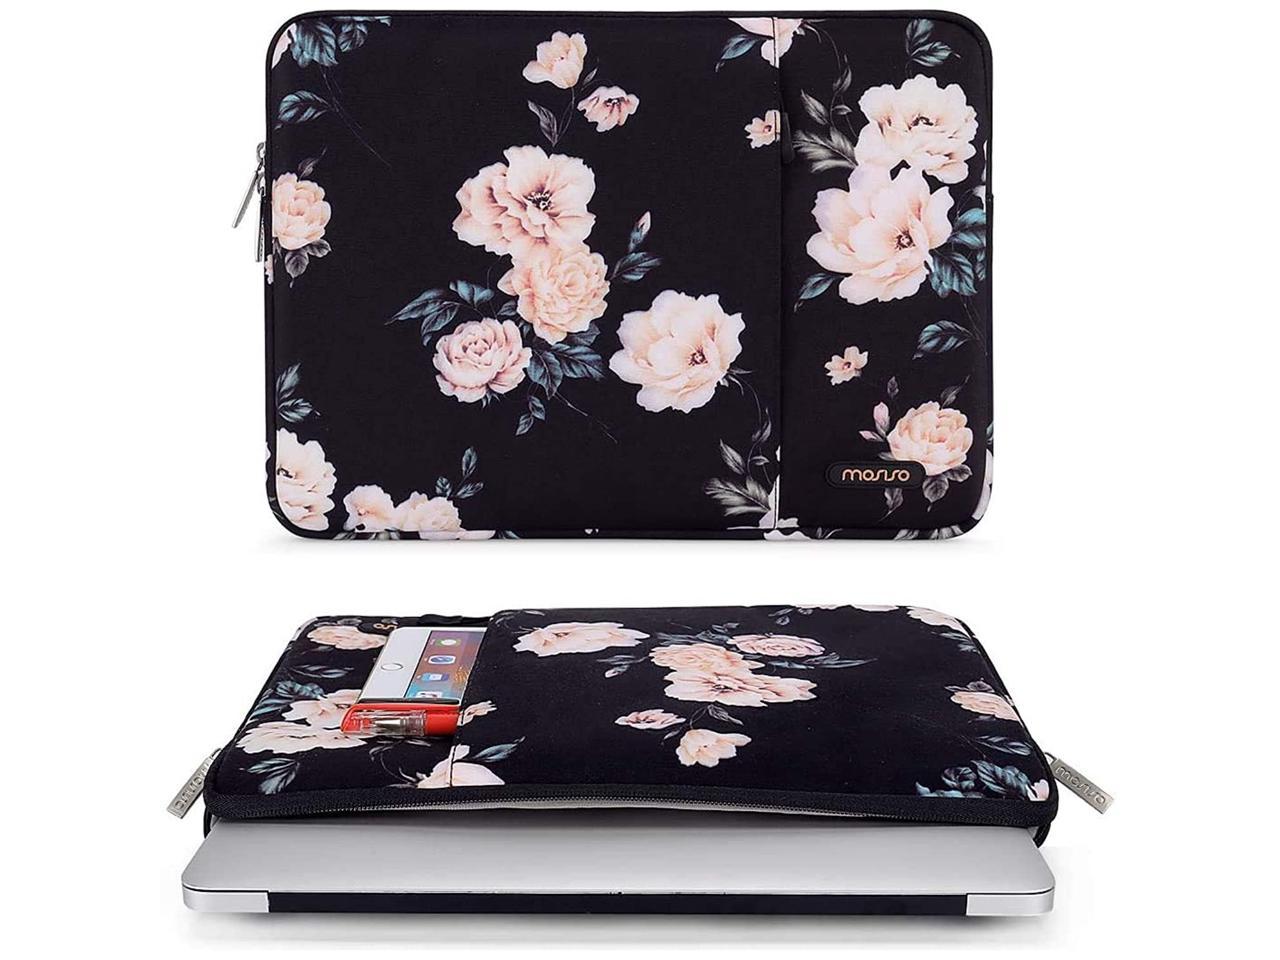 MOSISO Tablet Sleeve Compatible with 2020 iPad Pro 11 inch Water Repellent Neoprene Pattern Bag with Small Case Surface Go 9.7 iPad 10.5 iPad Air 3 Apricot Peony 10.5 iPad Pro iPad 7 10.2 2019 